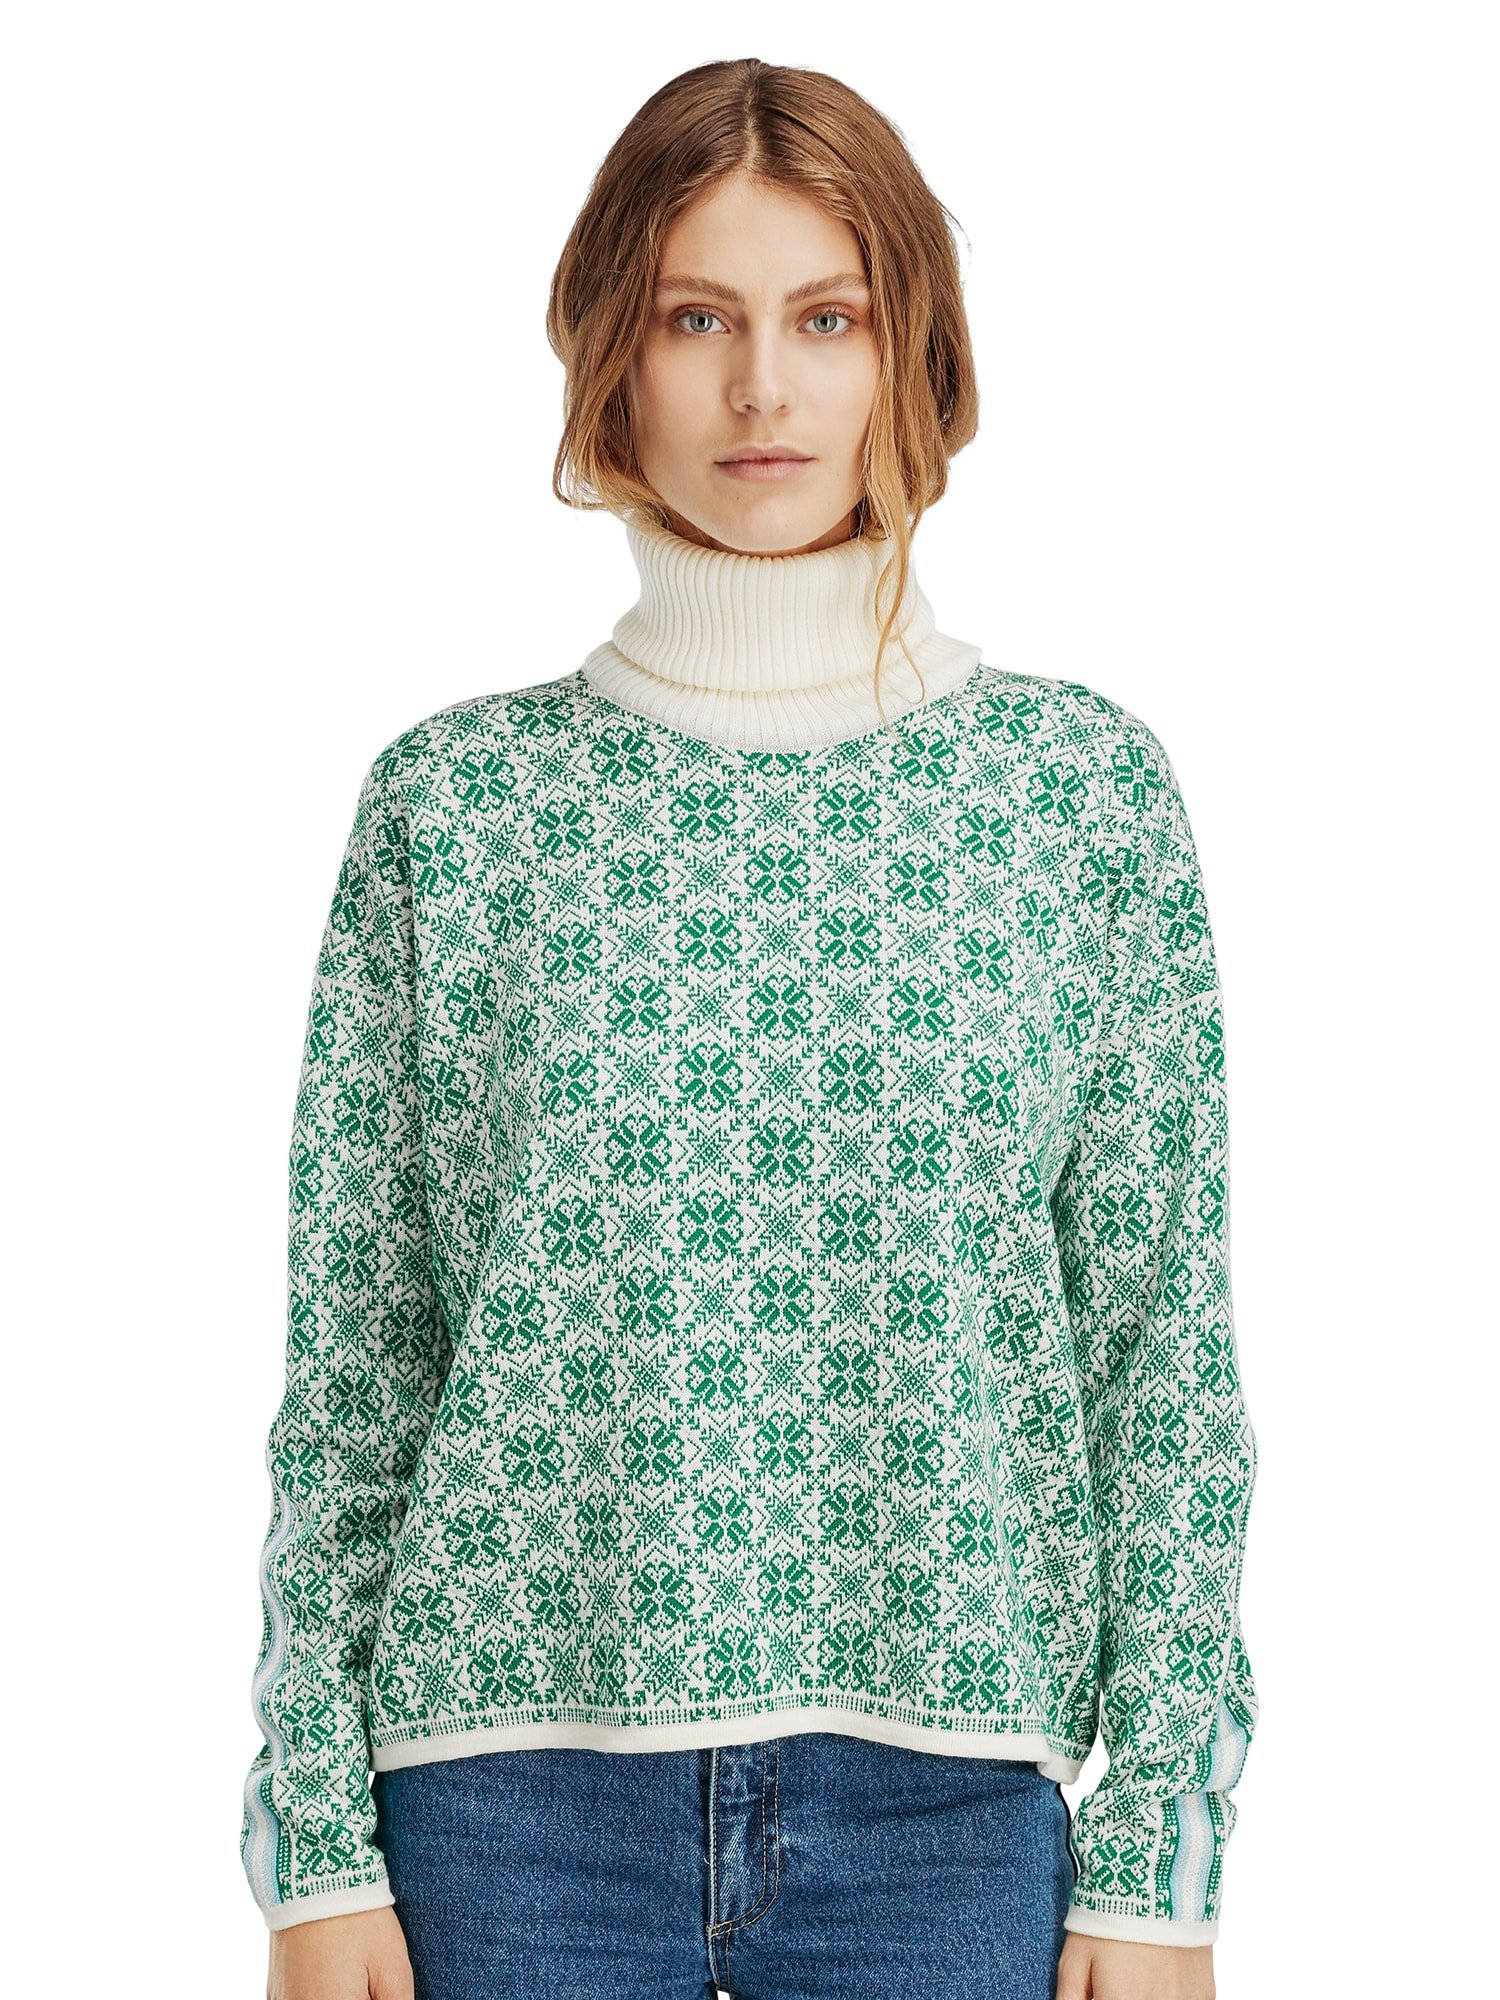 Firda Sweater - Women - Brightgreen/Offwhite - Dale of Norway